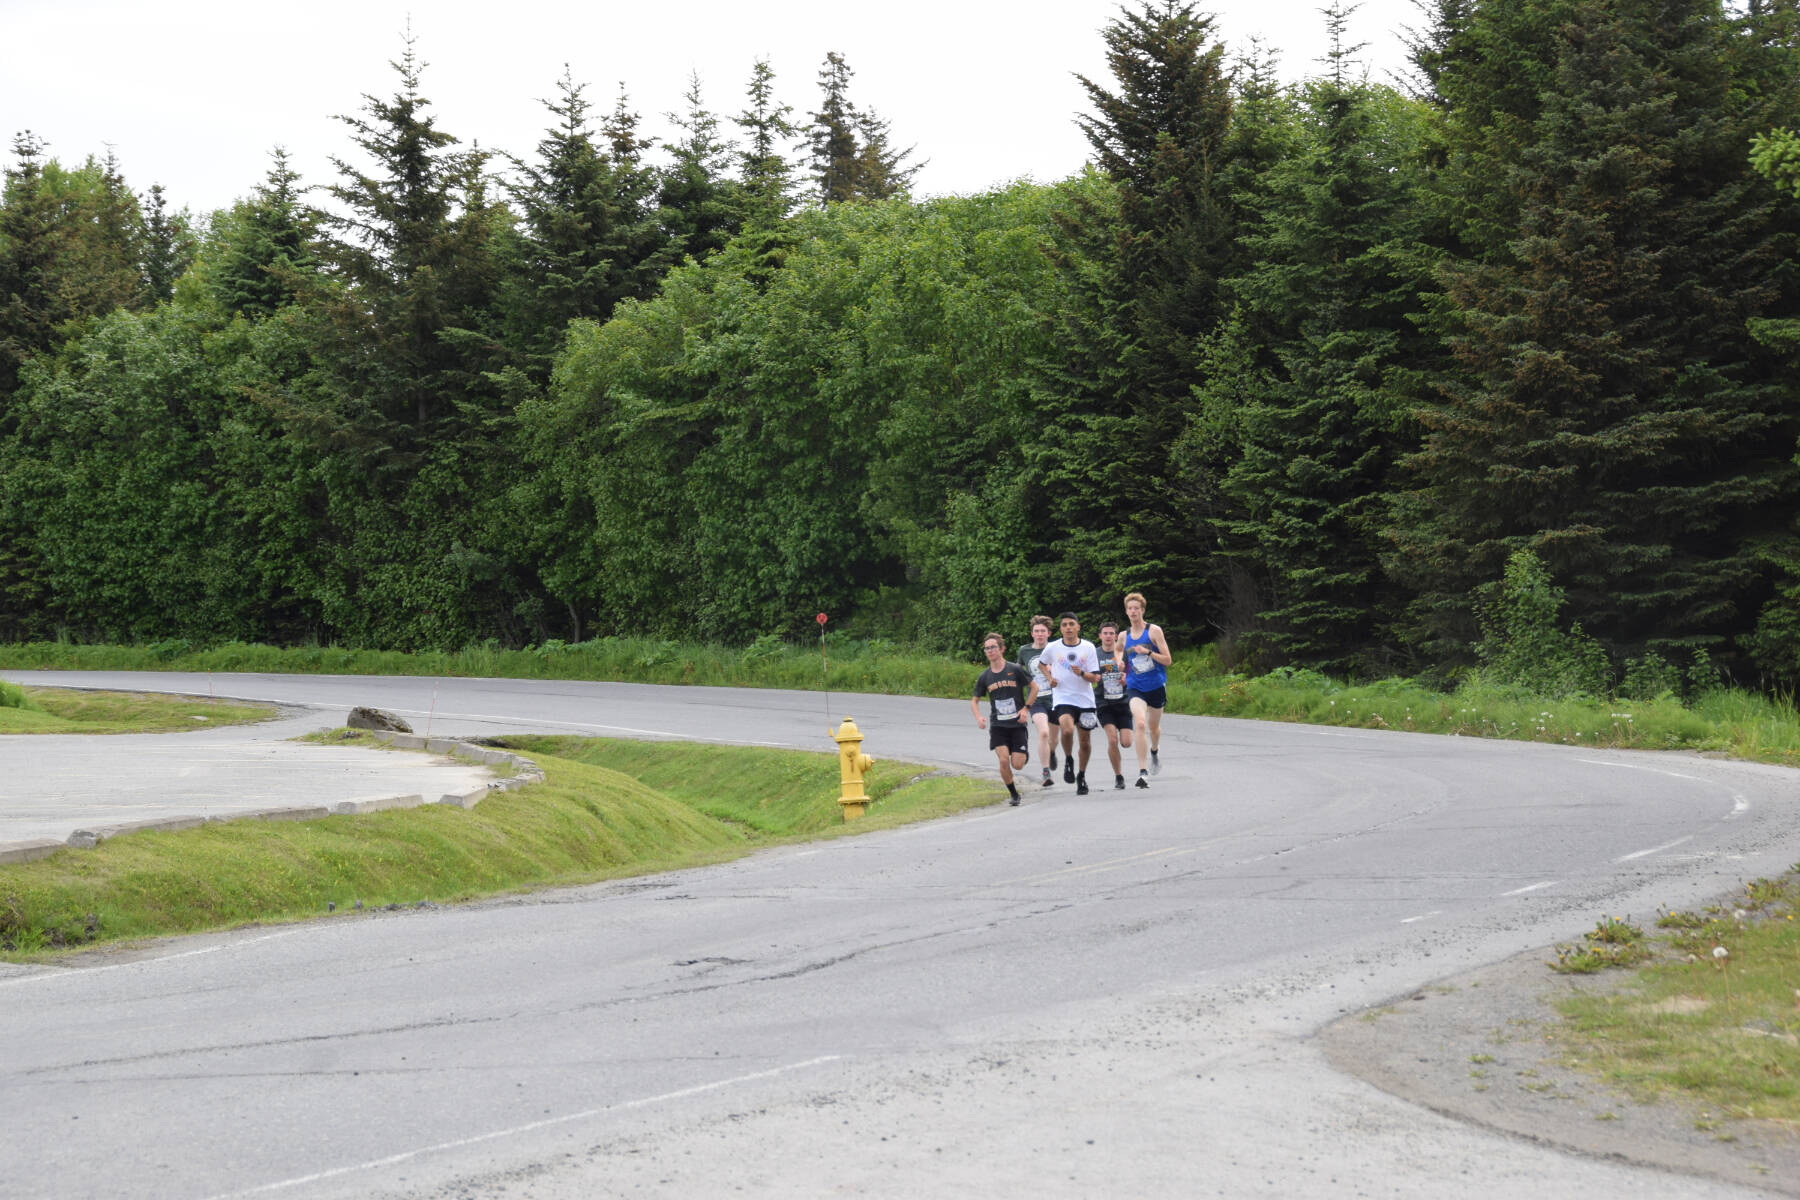 A leading pack of runners participating in the Homer Spit Run 10K to the Bay race round the curve of Ben Walters Lane on Saturday, June 24, 2023 in Homer, Alaska. (Delcenia Cosman/Homer News)